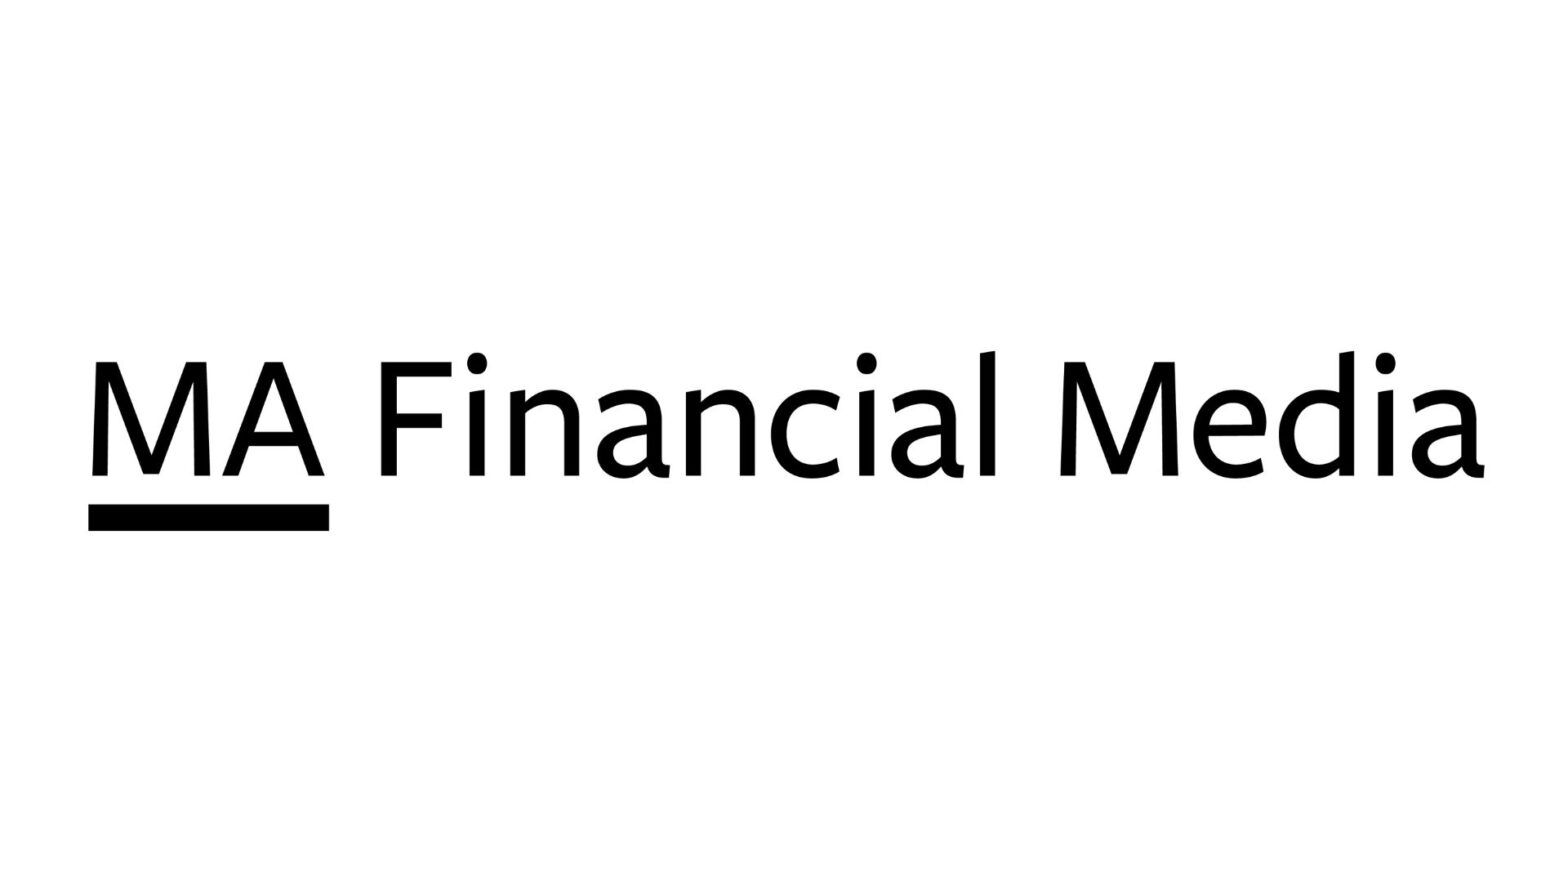 MA Financial Media rebadges stable under flagship ‘PA’ brand